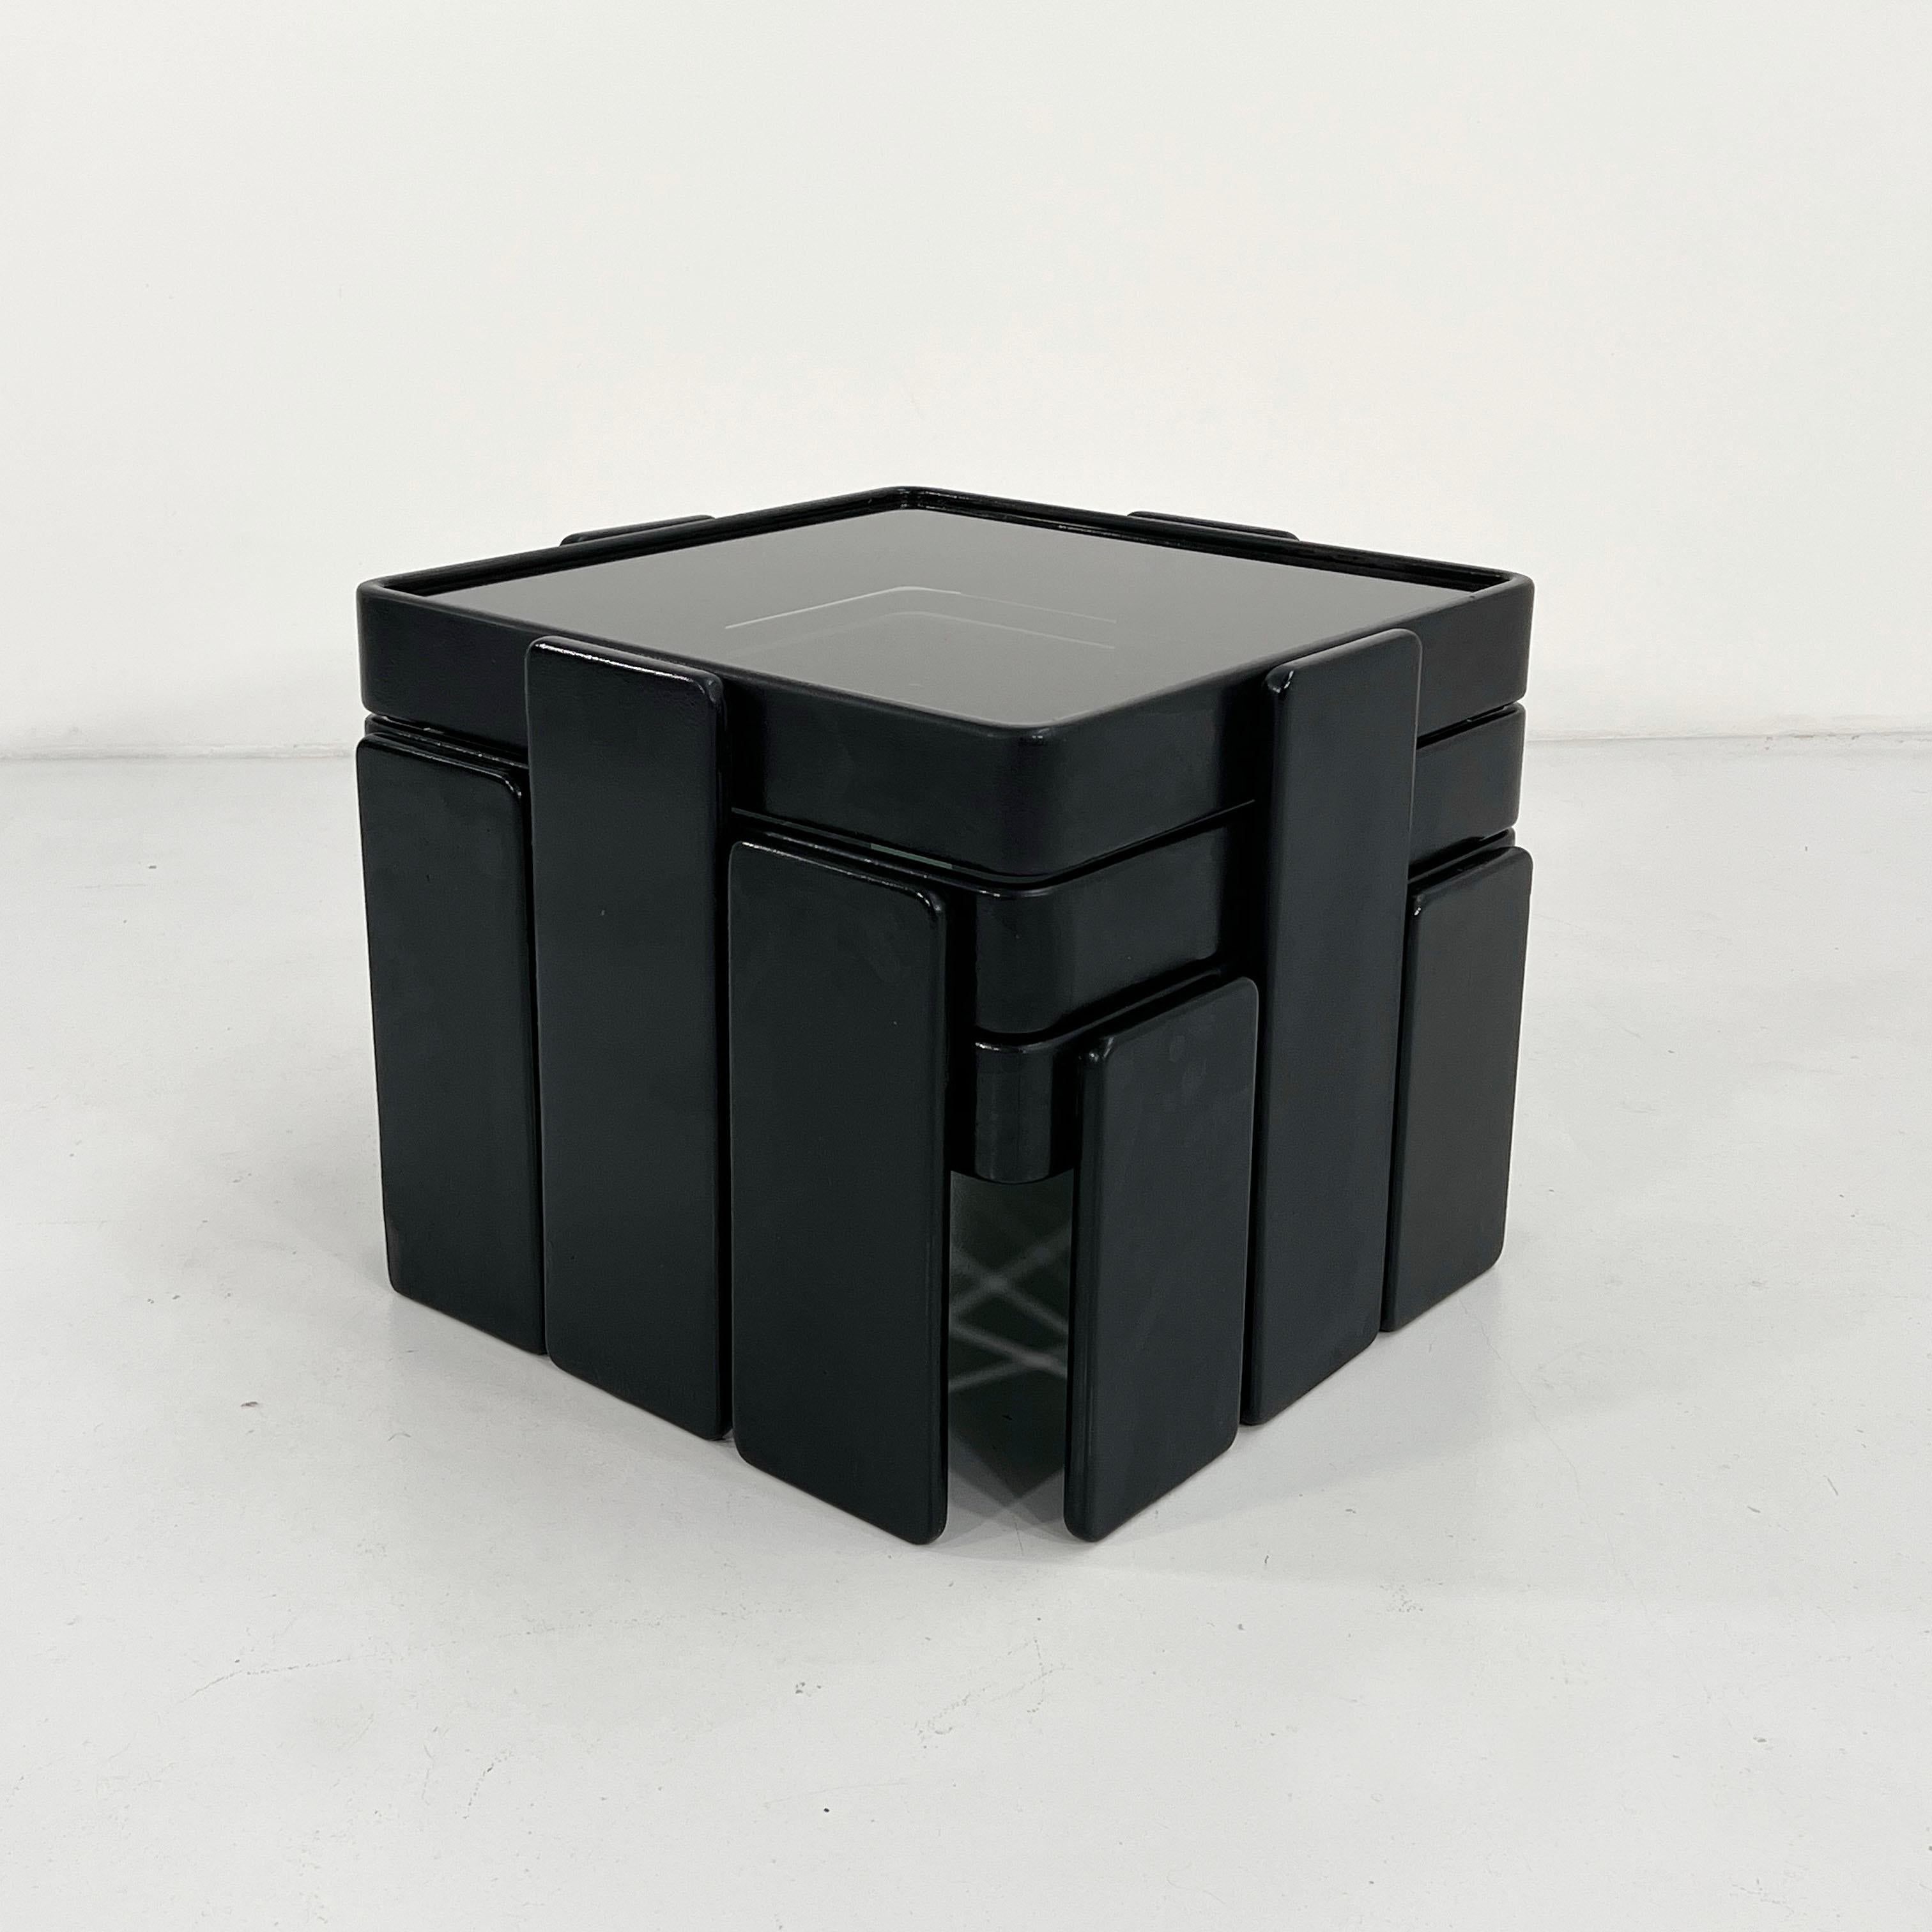 Set of Nesting Tables by Gianfranco Frattini for Cassina, 1970s
Designer - Gianfranco Frattini
Producer - Cassina 
Model - Nesting Tables
Design Period - Seventies
Measurements - Width 58 cm x Depth 58 cm x Height 46 cm
Materials - Painted Wood,